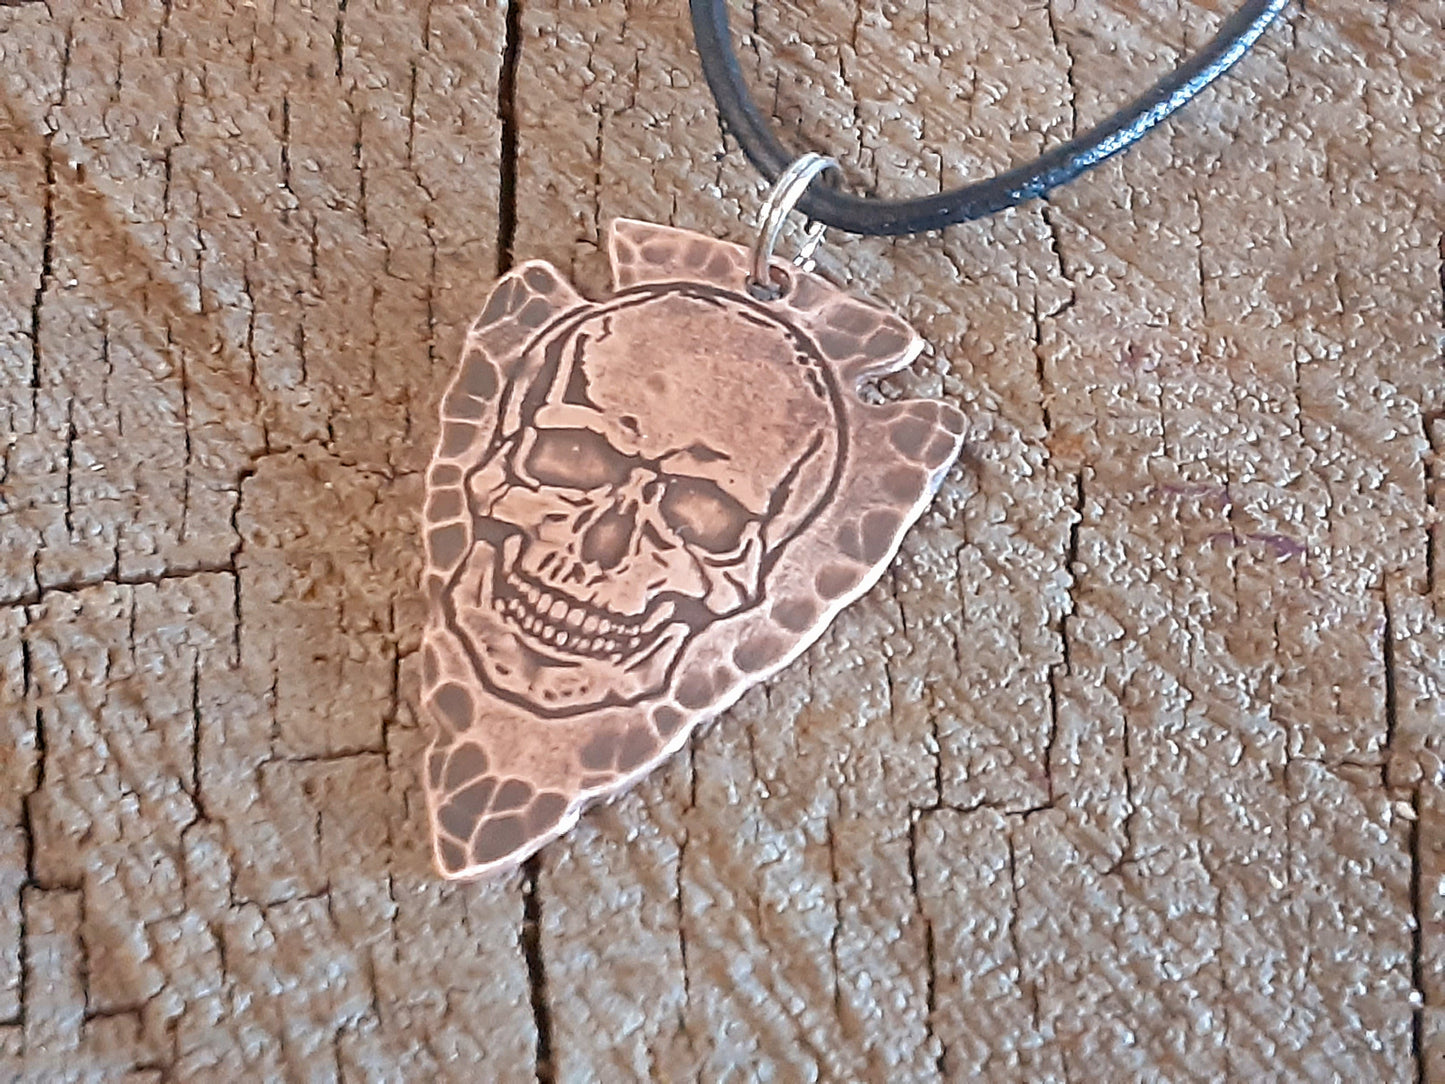 Arrowhead necklace in copper with skull theme